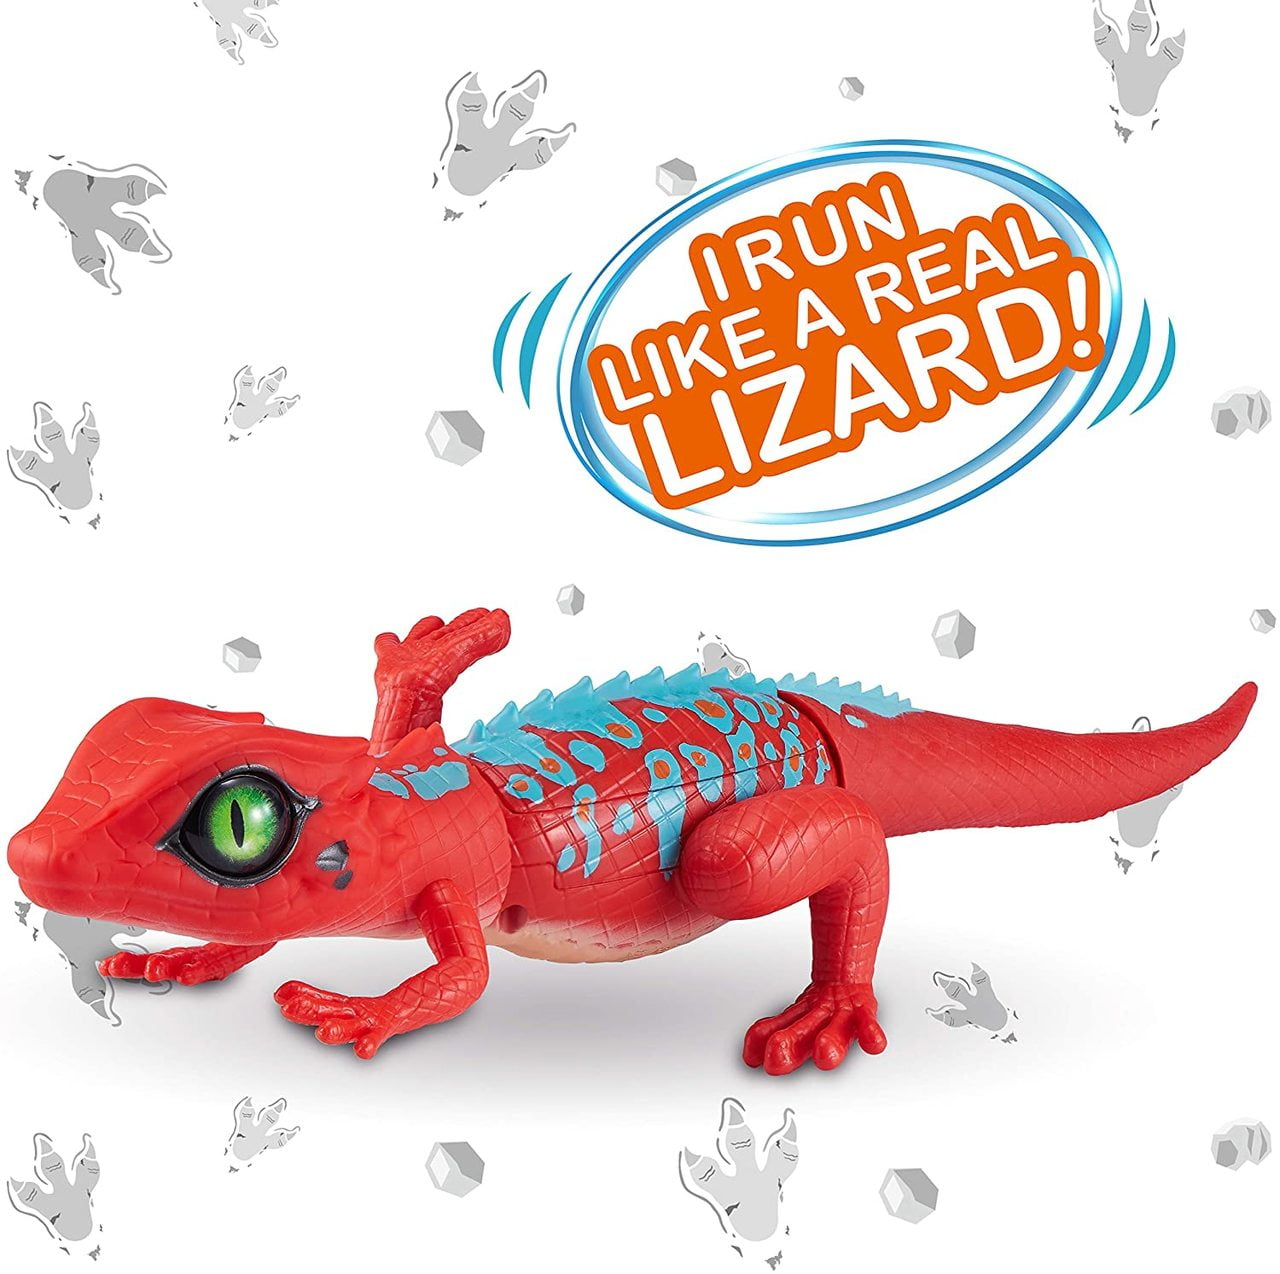 Robo Alive Lurking Red Lizard Battery-powered Robotic Toy Pn25234 by ZURU for sale online 